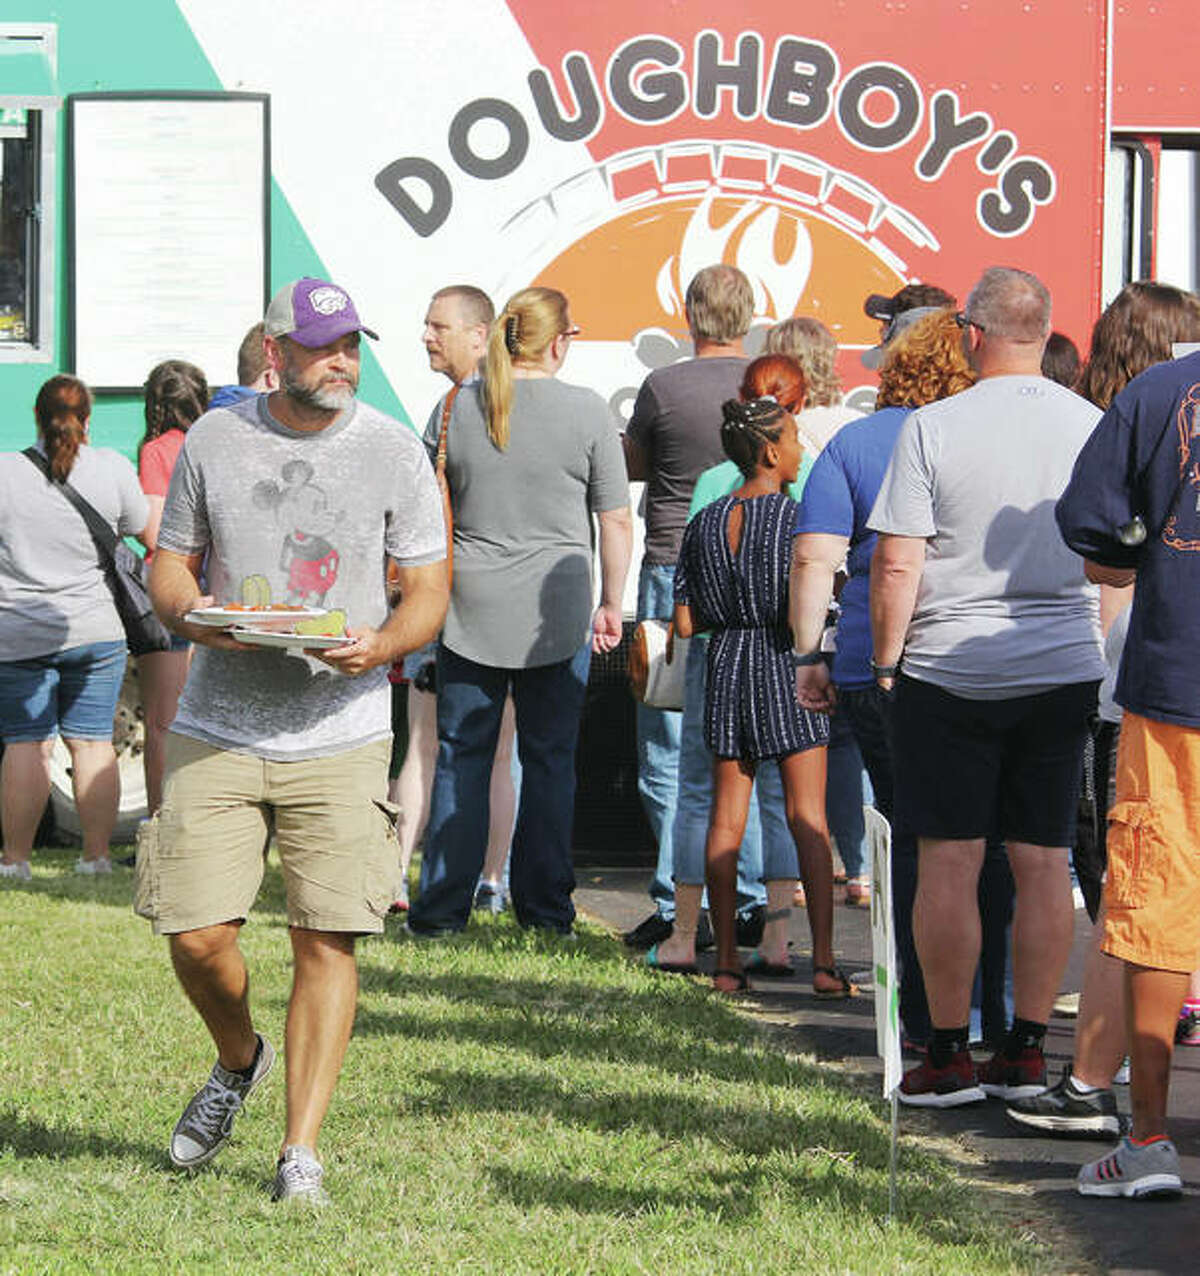 Tim Black, of Holiday Shores, in 2019 carries two pepperoni pizzas from Doughboy’s which is returning this year for the Alton Food Truck Festival 4-8 p.m. Saturday, Aug. 27 at the Liberty Bank Amphitheater in Alton.